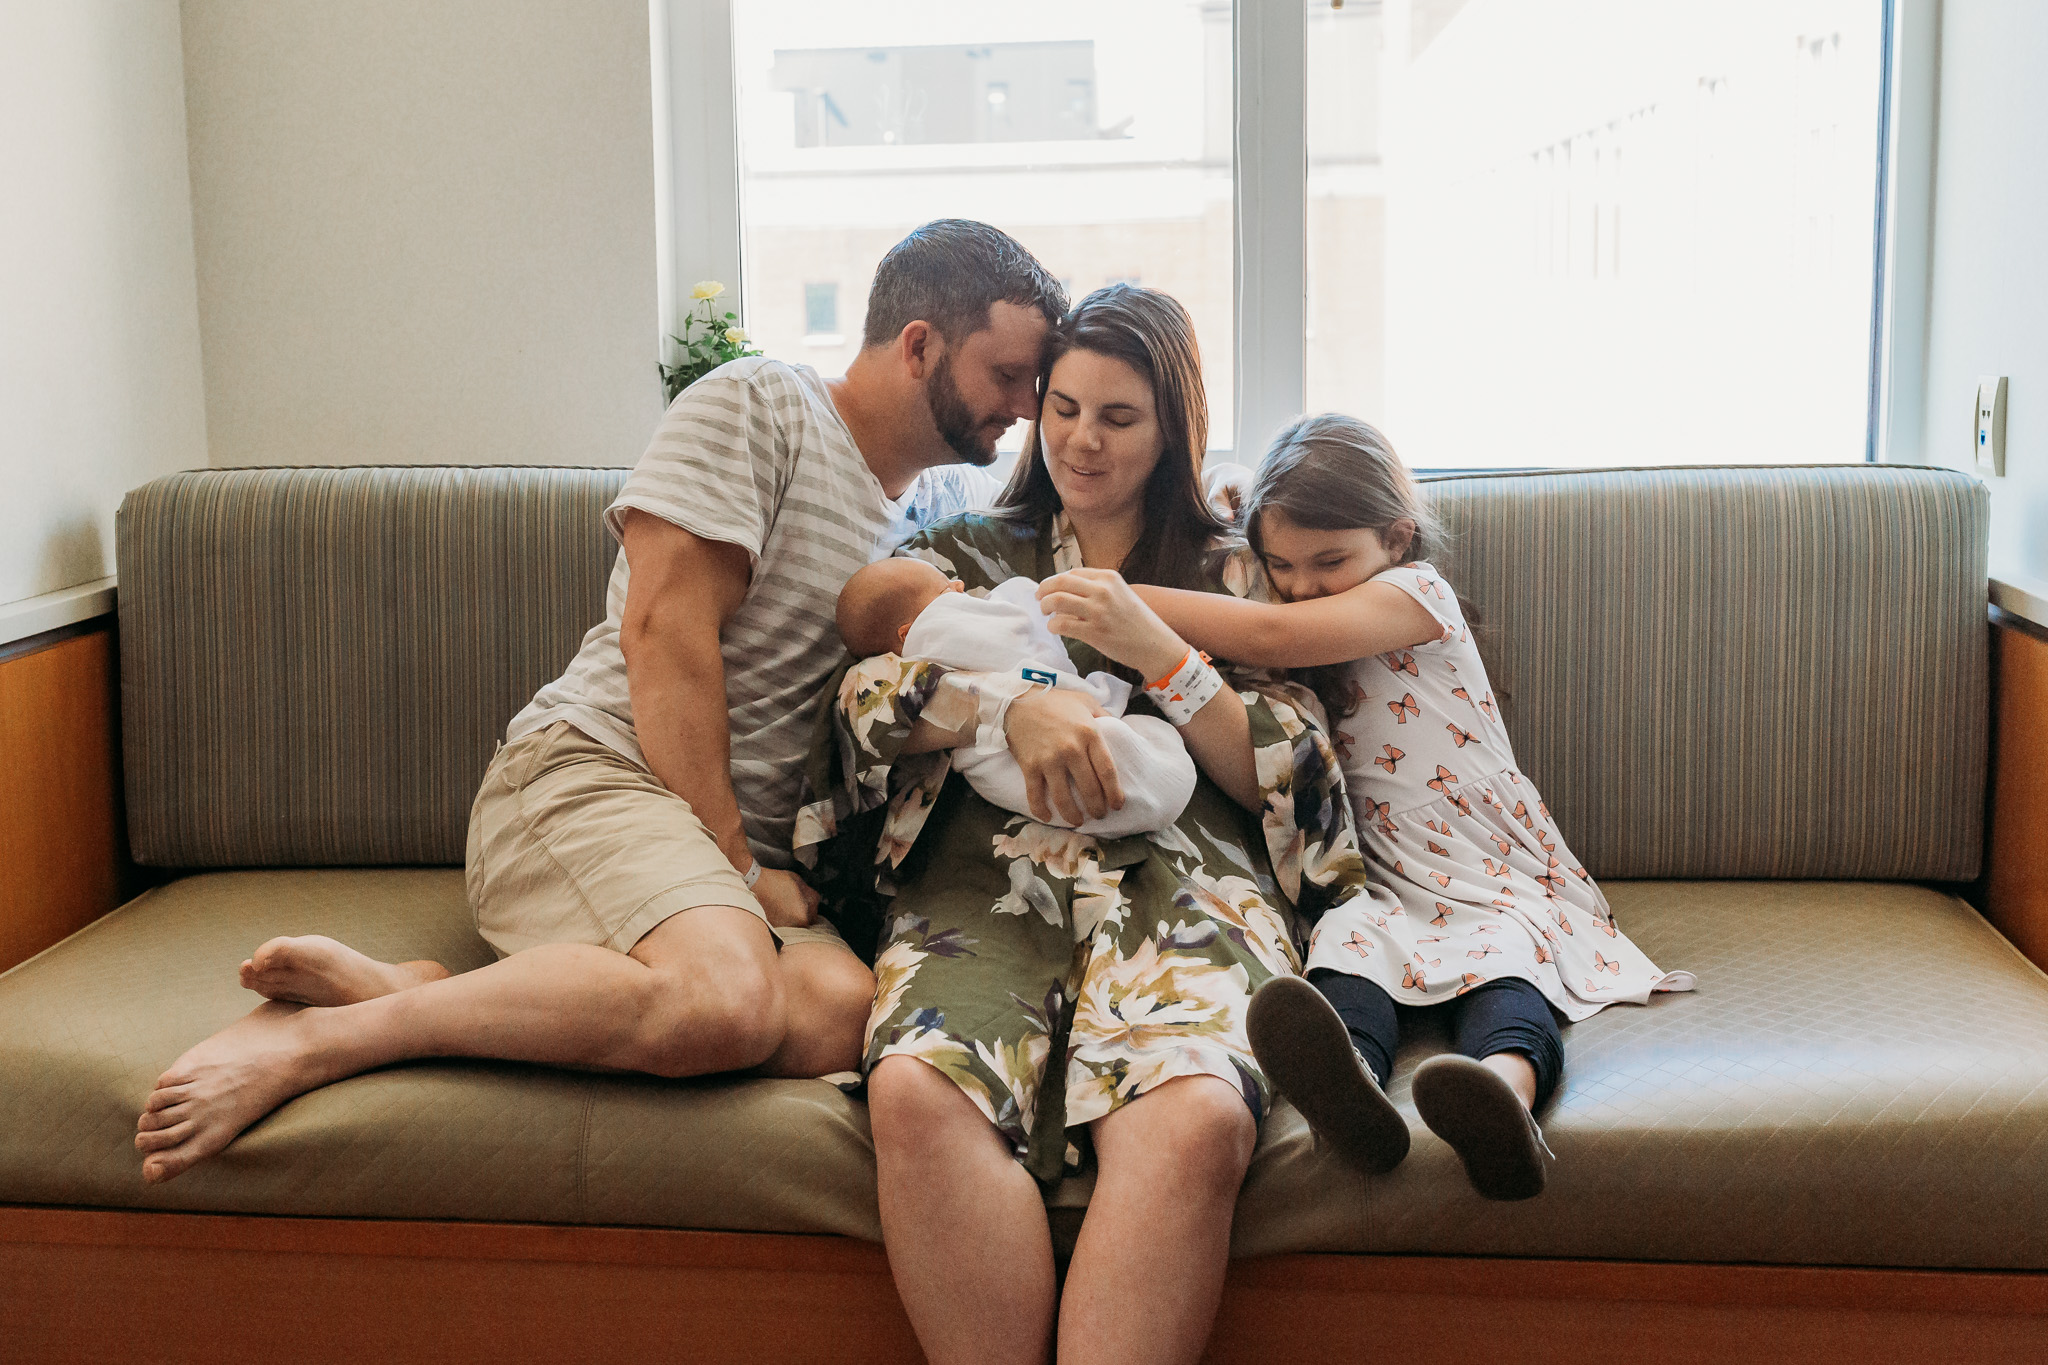 family embraces on couch in hospital room